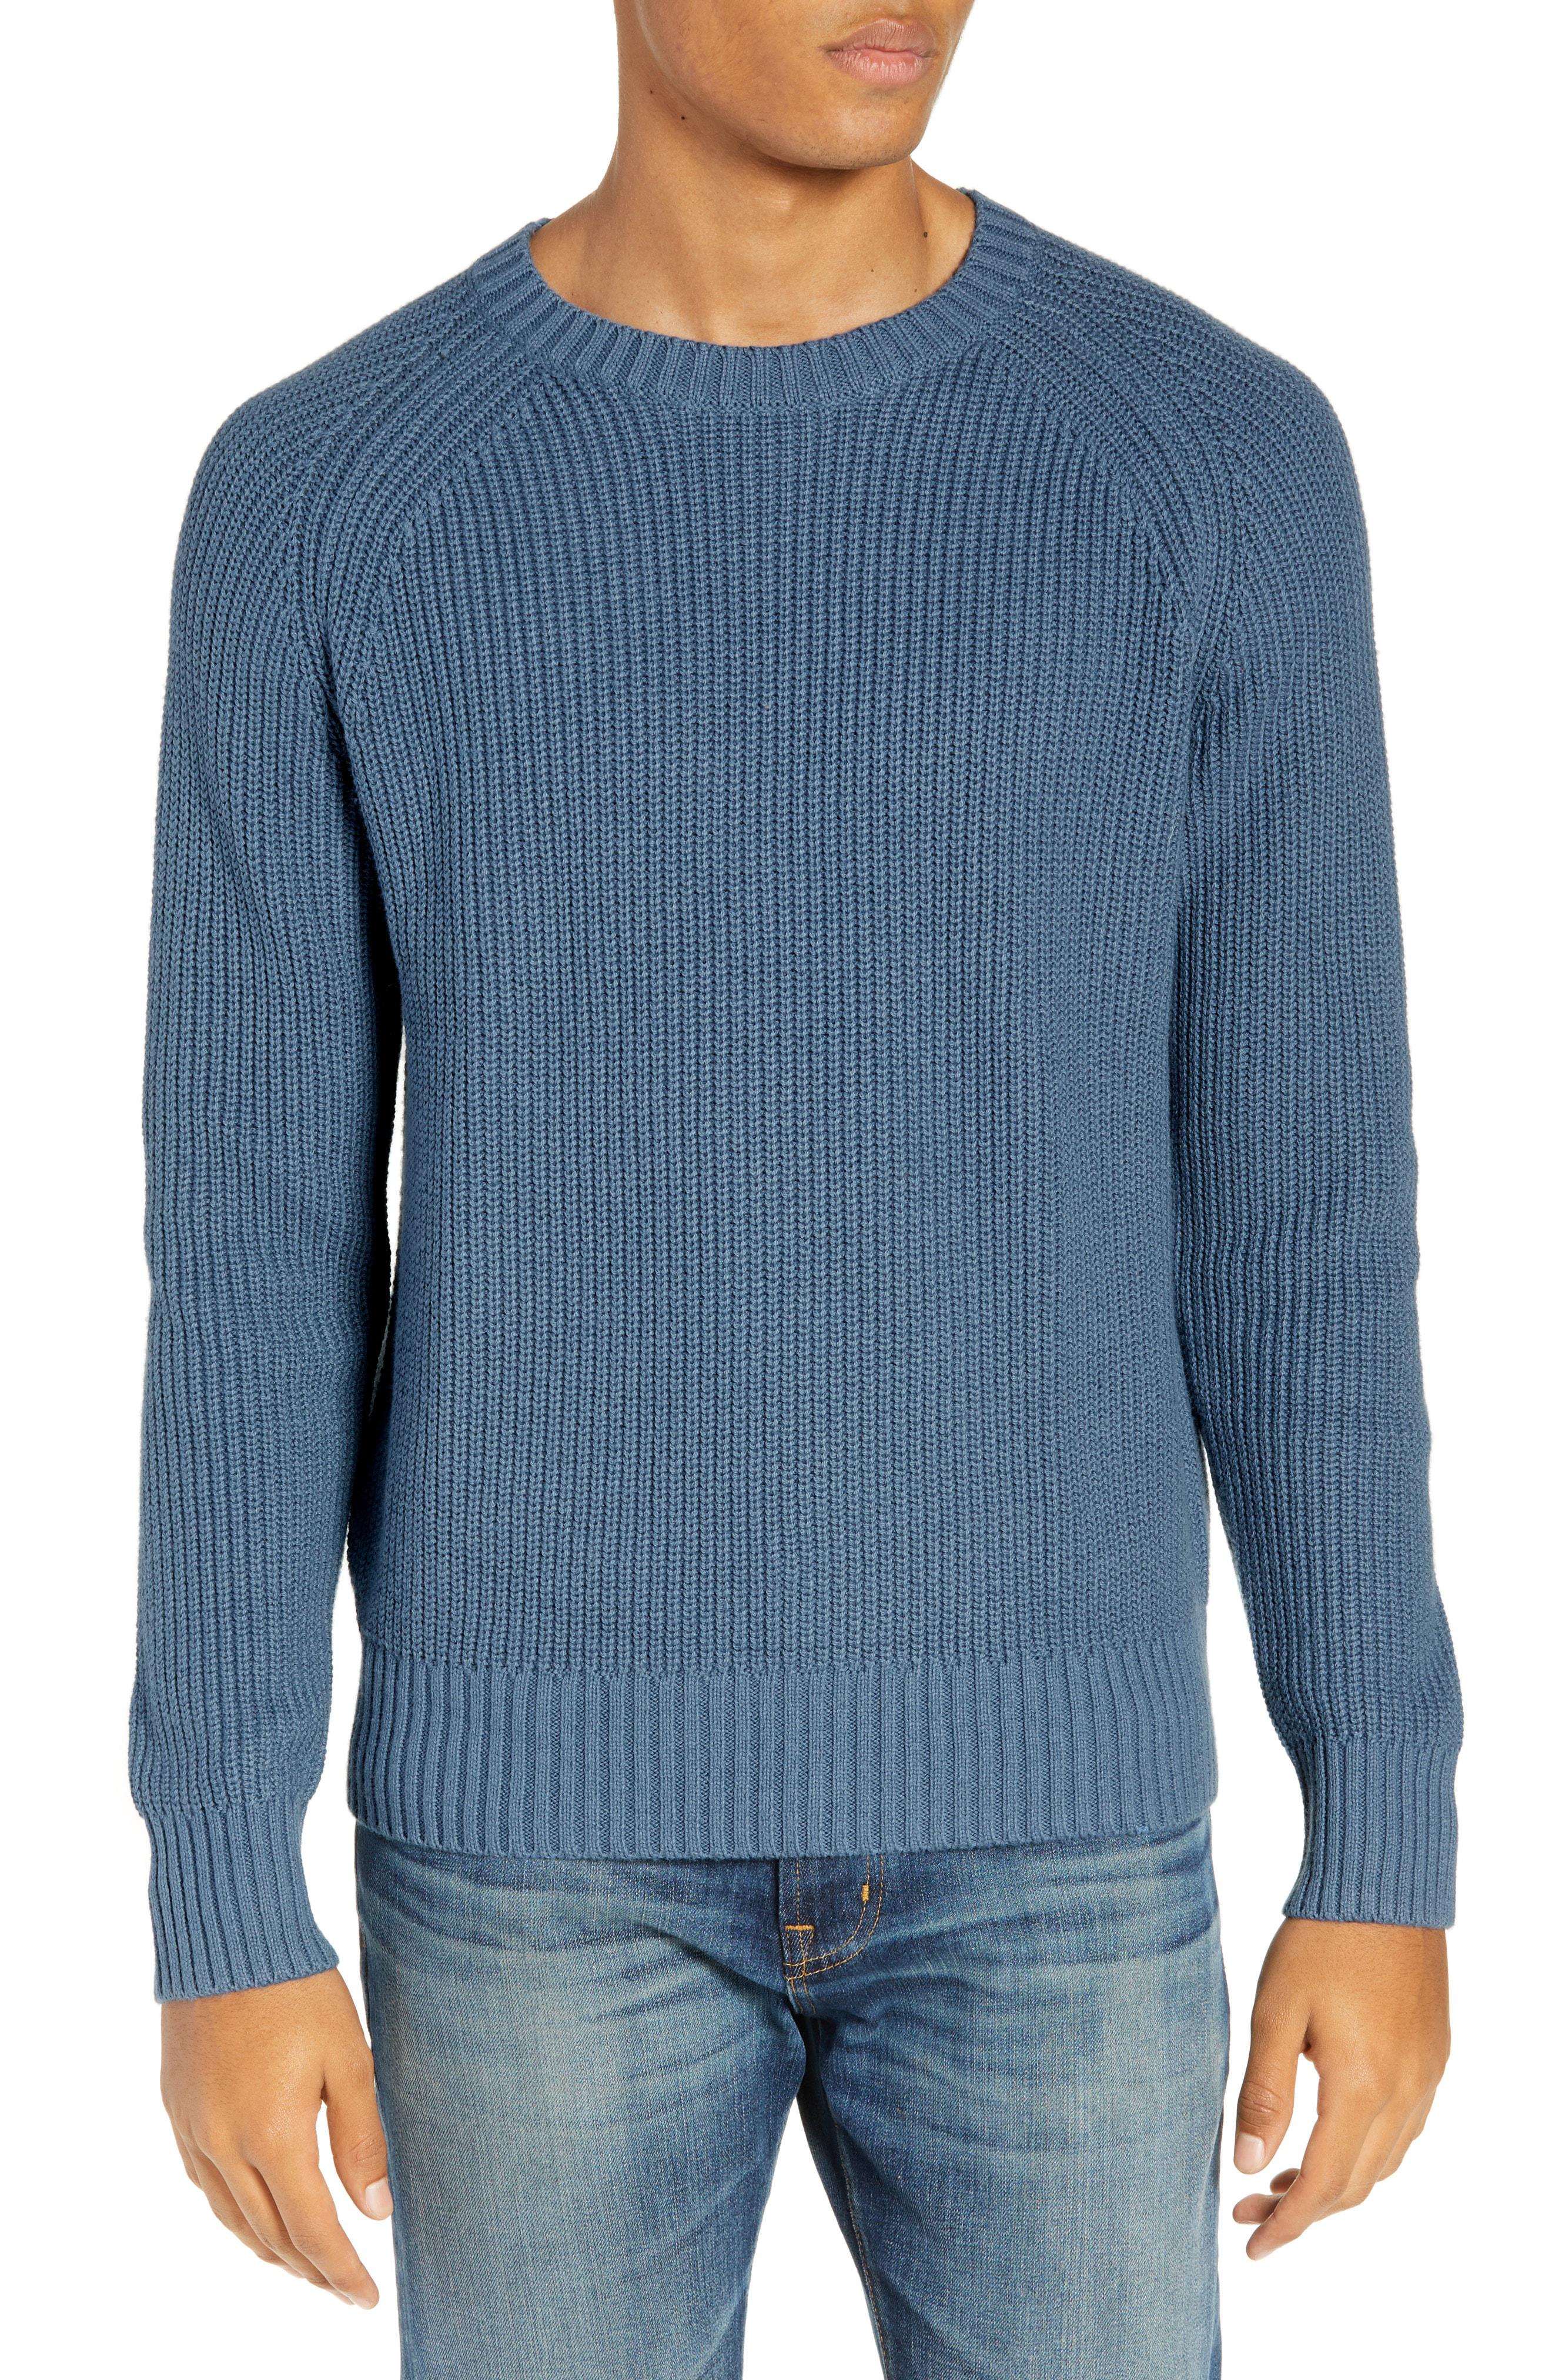 Bonobos Slim Fit Cotton & Cashmere Sweater in Blue for Men - Lyst